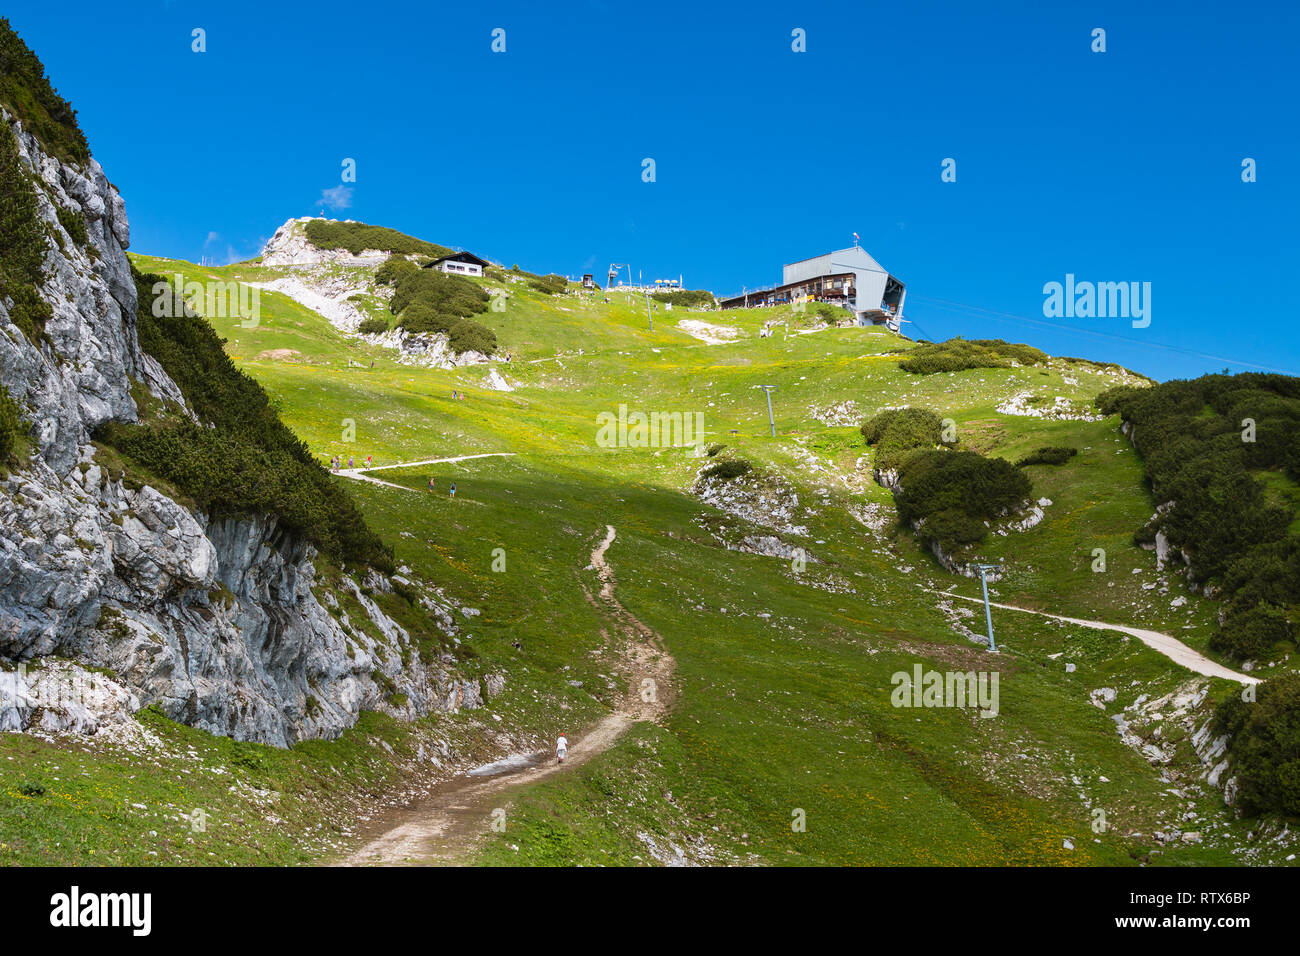 Mountain station of the Alpspitzbahn Cable Car on the Osterfelder Kopf, Germany. Stock Photo